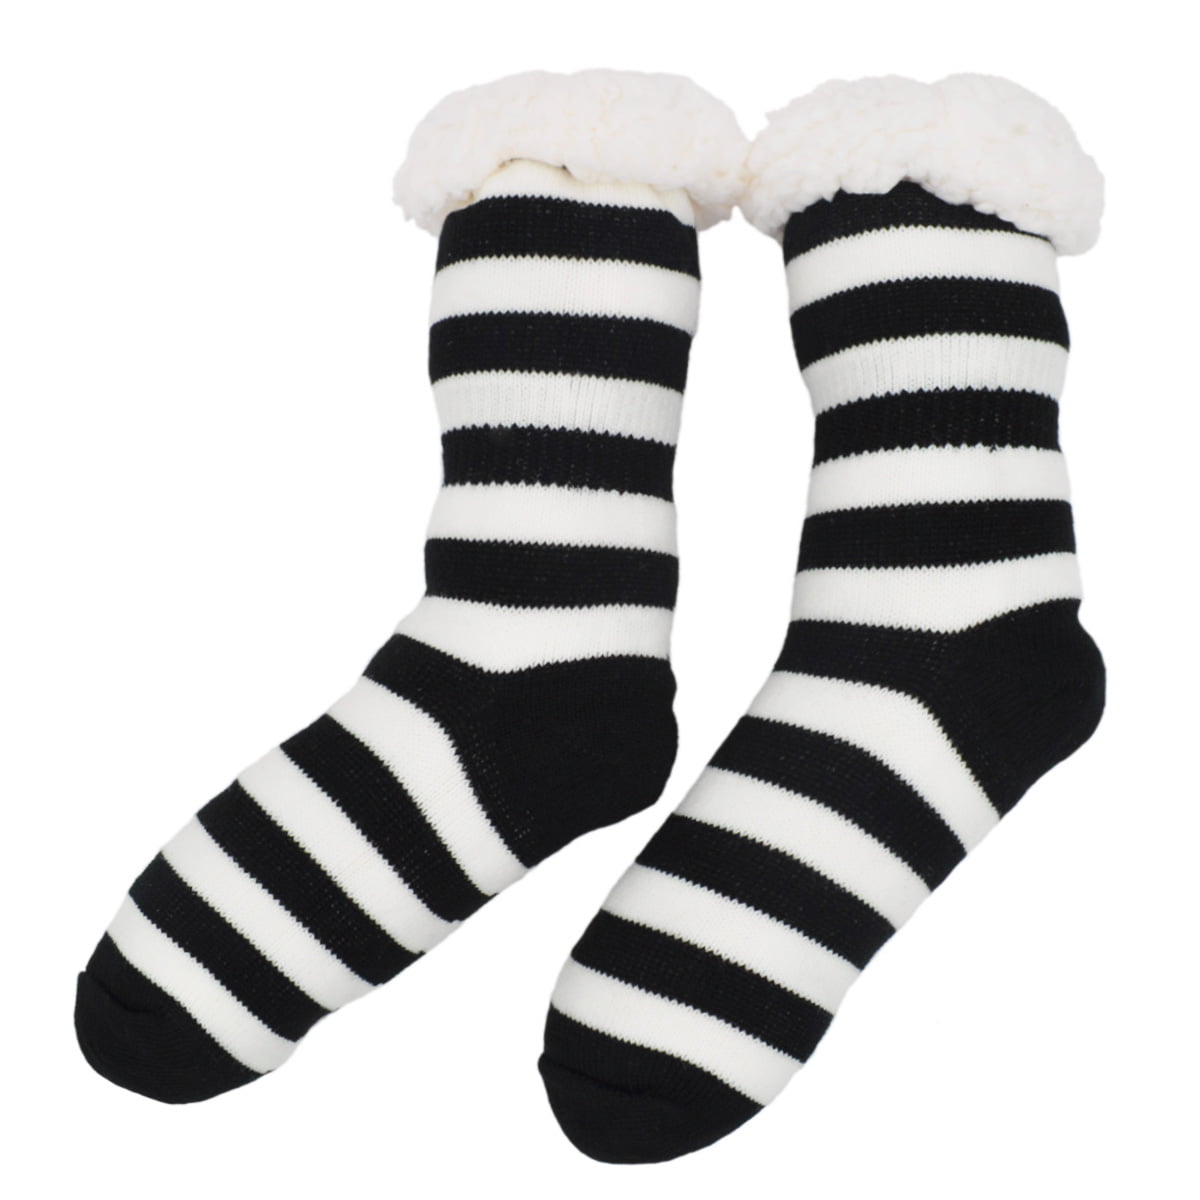 Extra Thick Reindeer Non-Skid Thermal Fleece-lined Knitted Plush Winter Socks